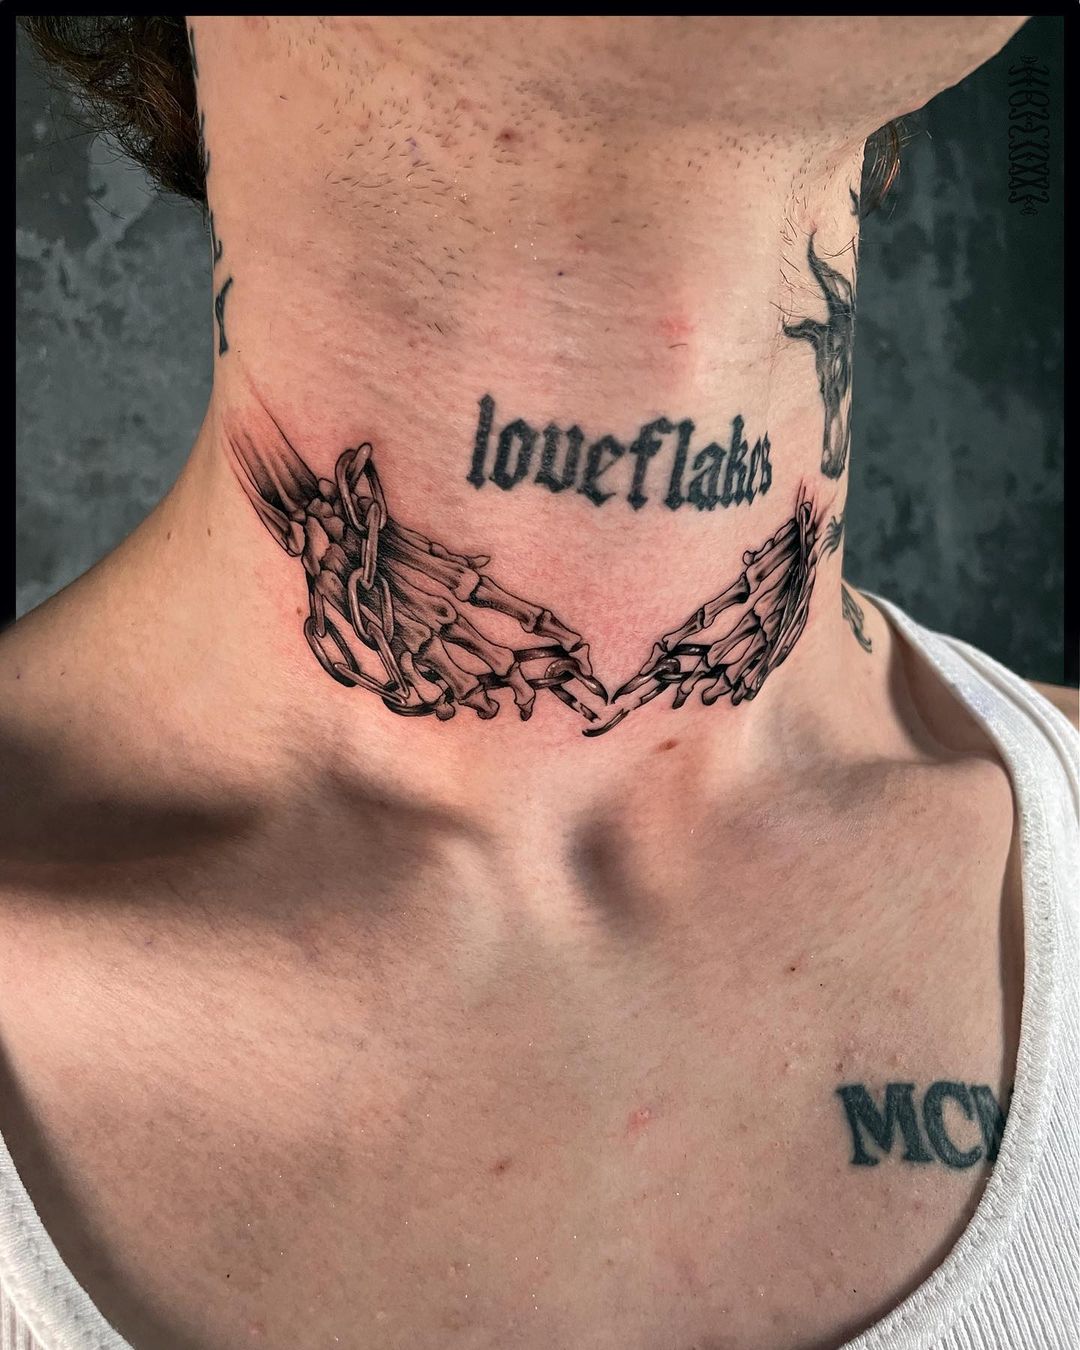 Why do people get tattoos on their necks? What are some alternatives to neck  tattoos? - Quora